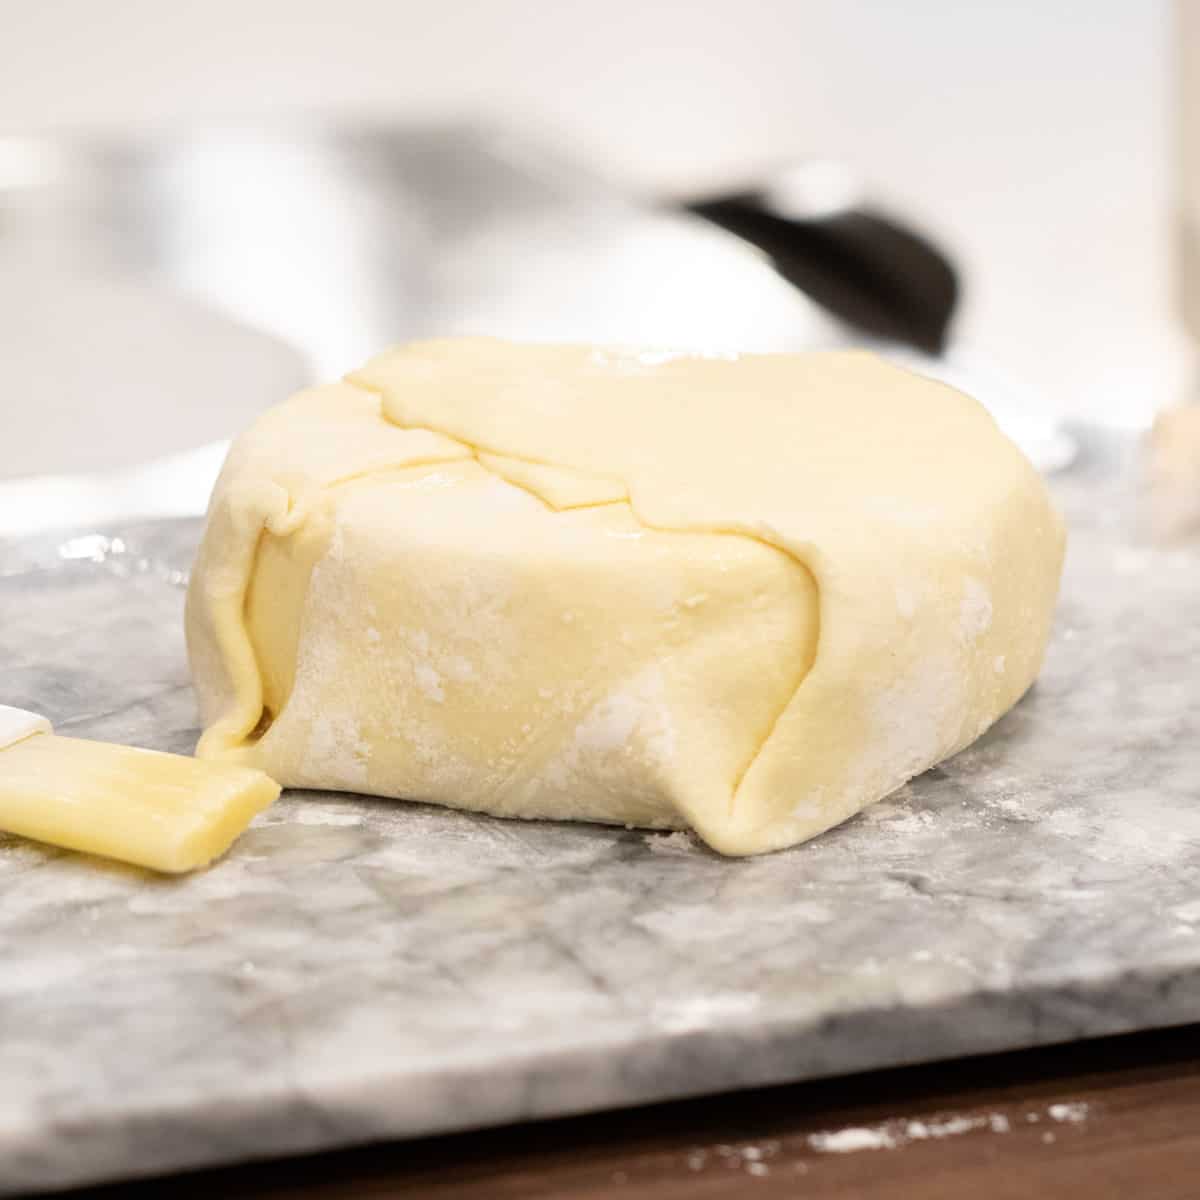 Puff pastry folded over a wheel of cheese.